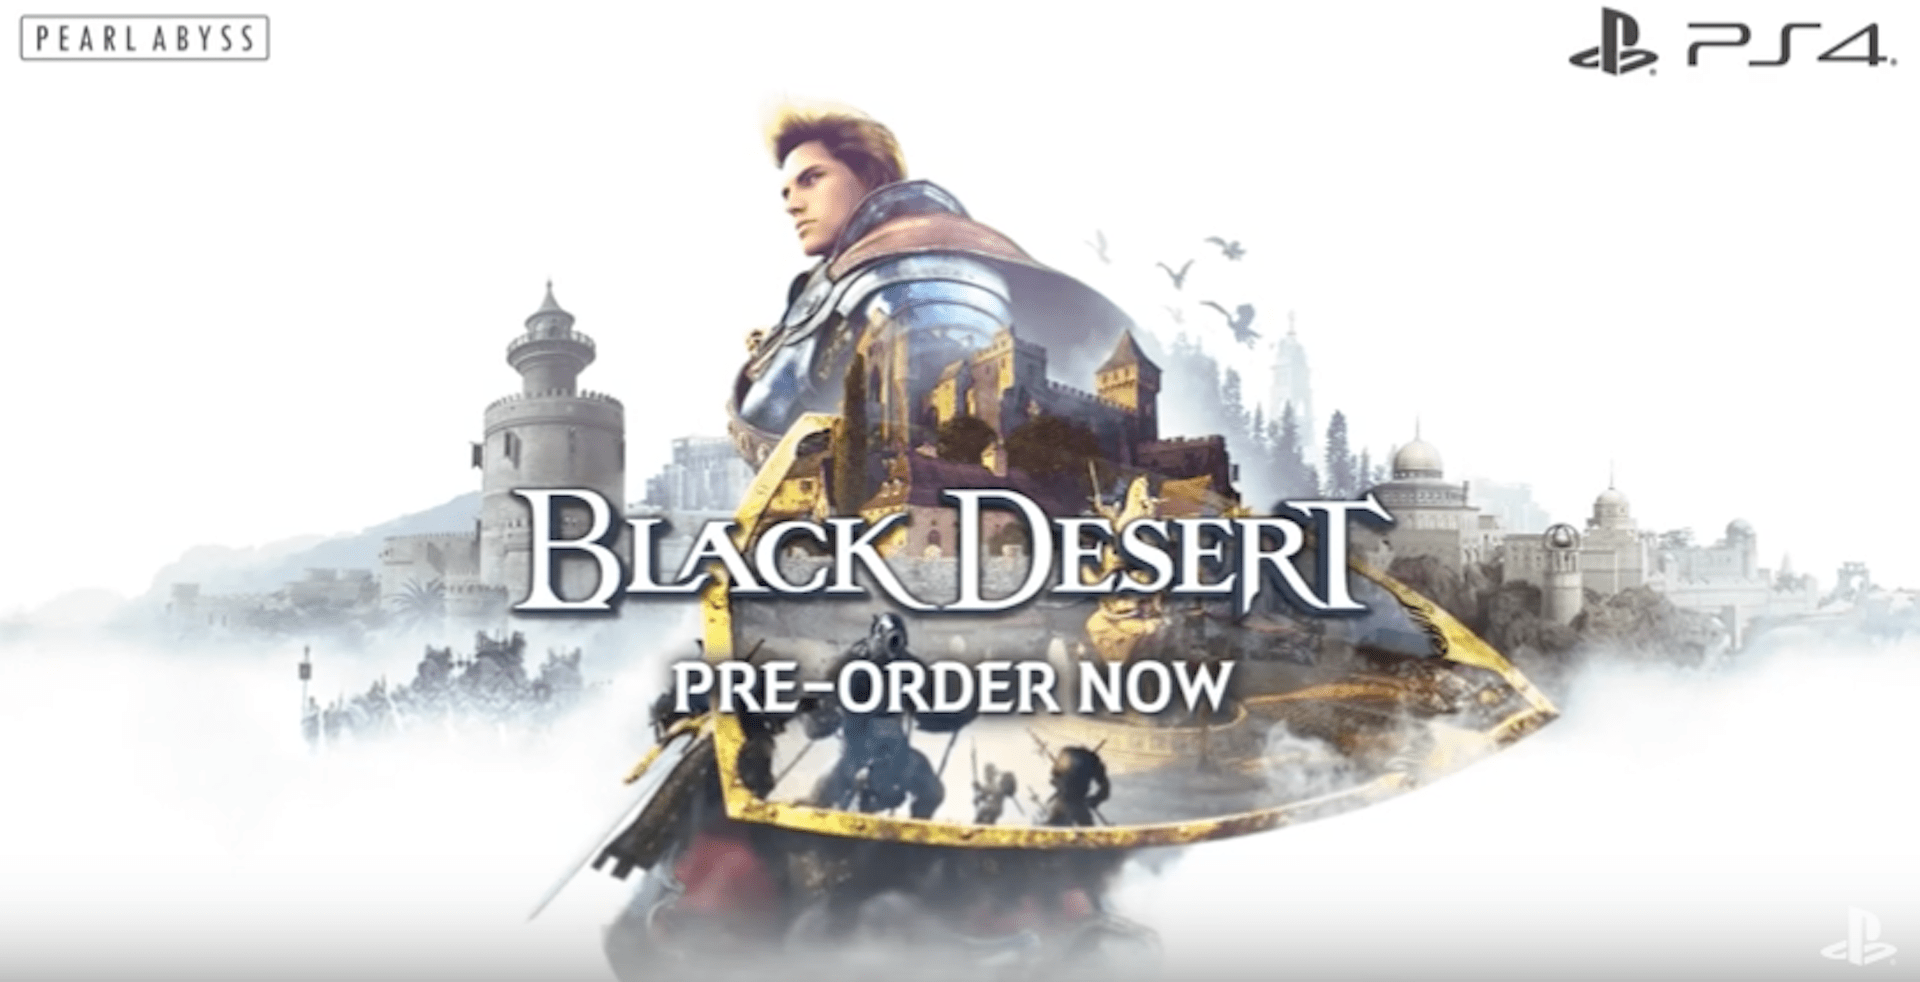 Better Late Than Never! Black Desert Heats Up PlayStation 4 This August 22